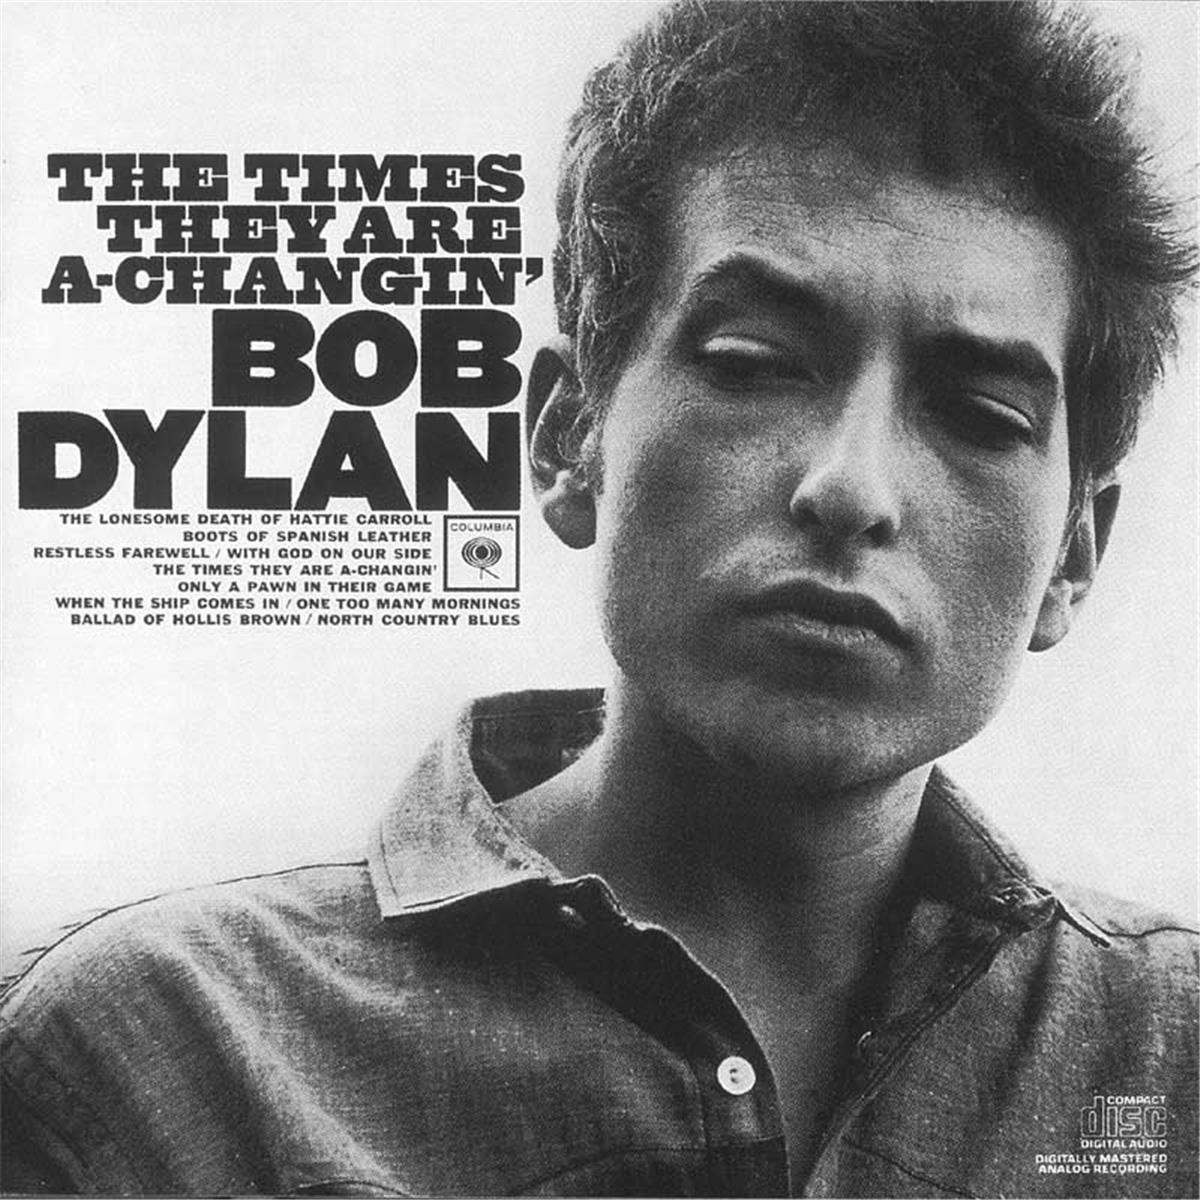 Bob Dylan ("The Times They Are A-Changin'" album cover)